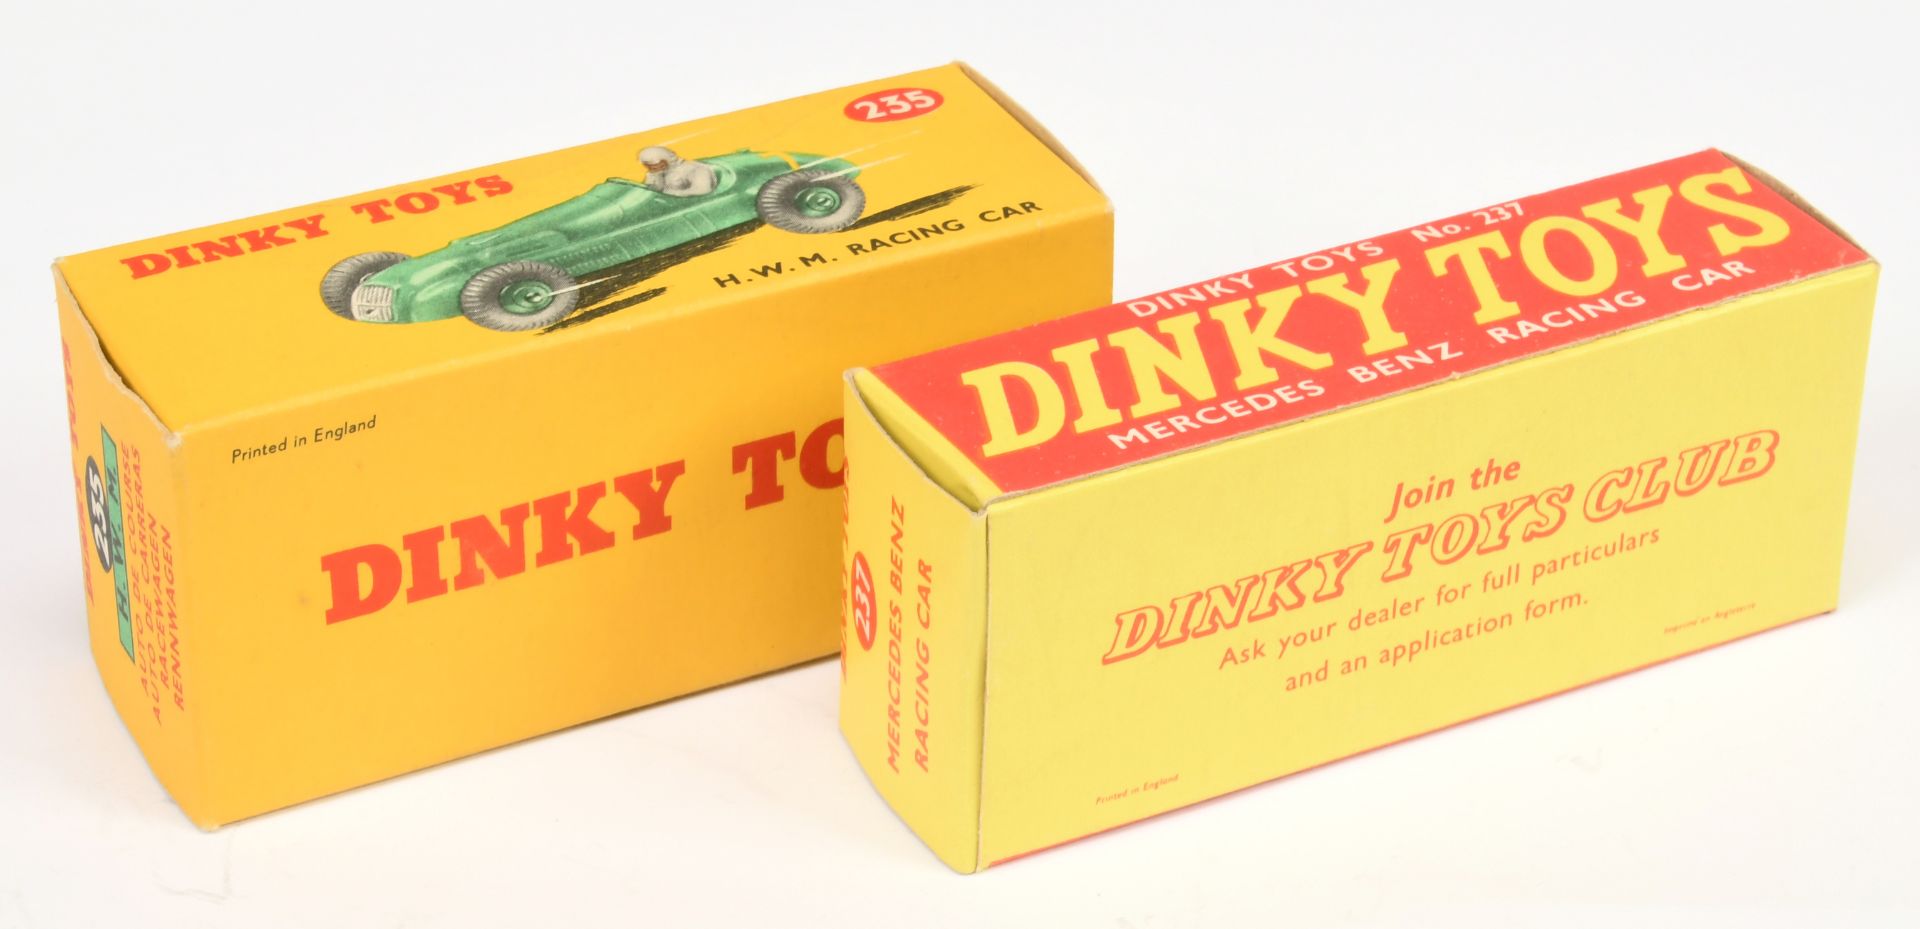 Dinky Toys Empty Boxes To Include (1) 235 HWM Racing Car - Yellow and red carded picture box is i... - Image 2 of 2